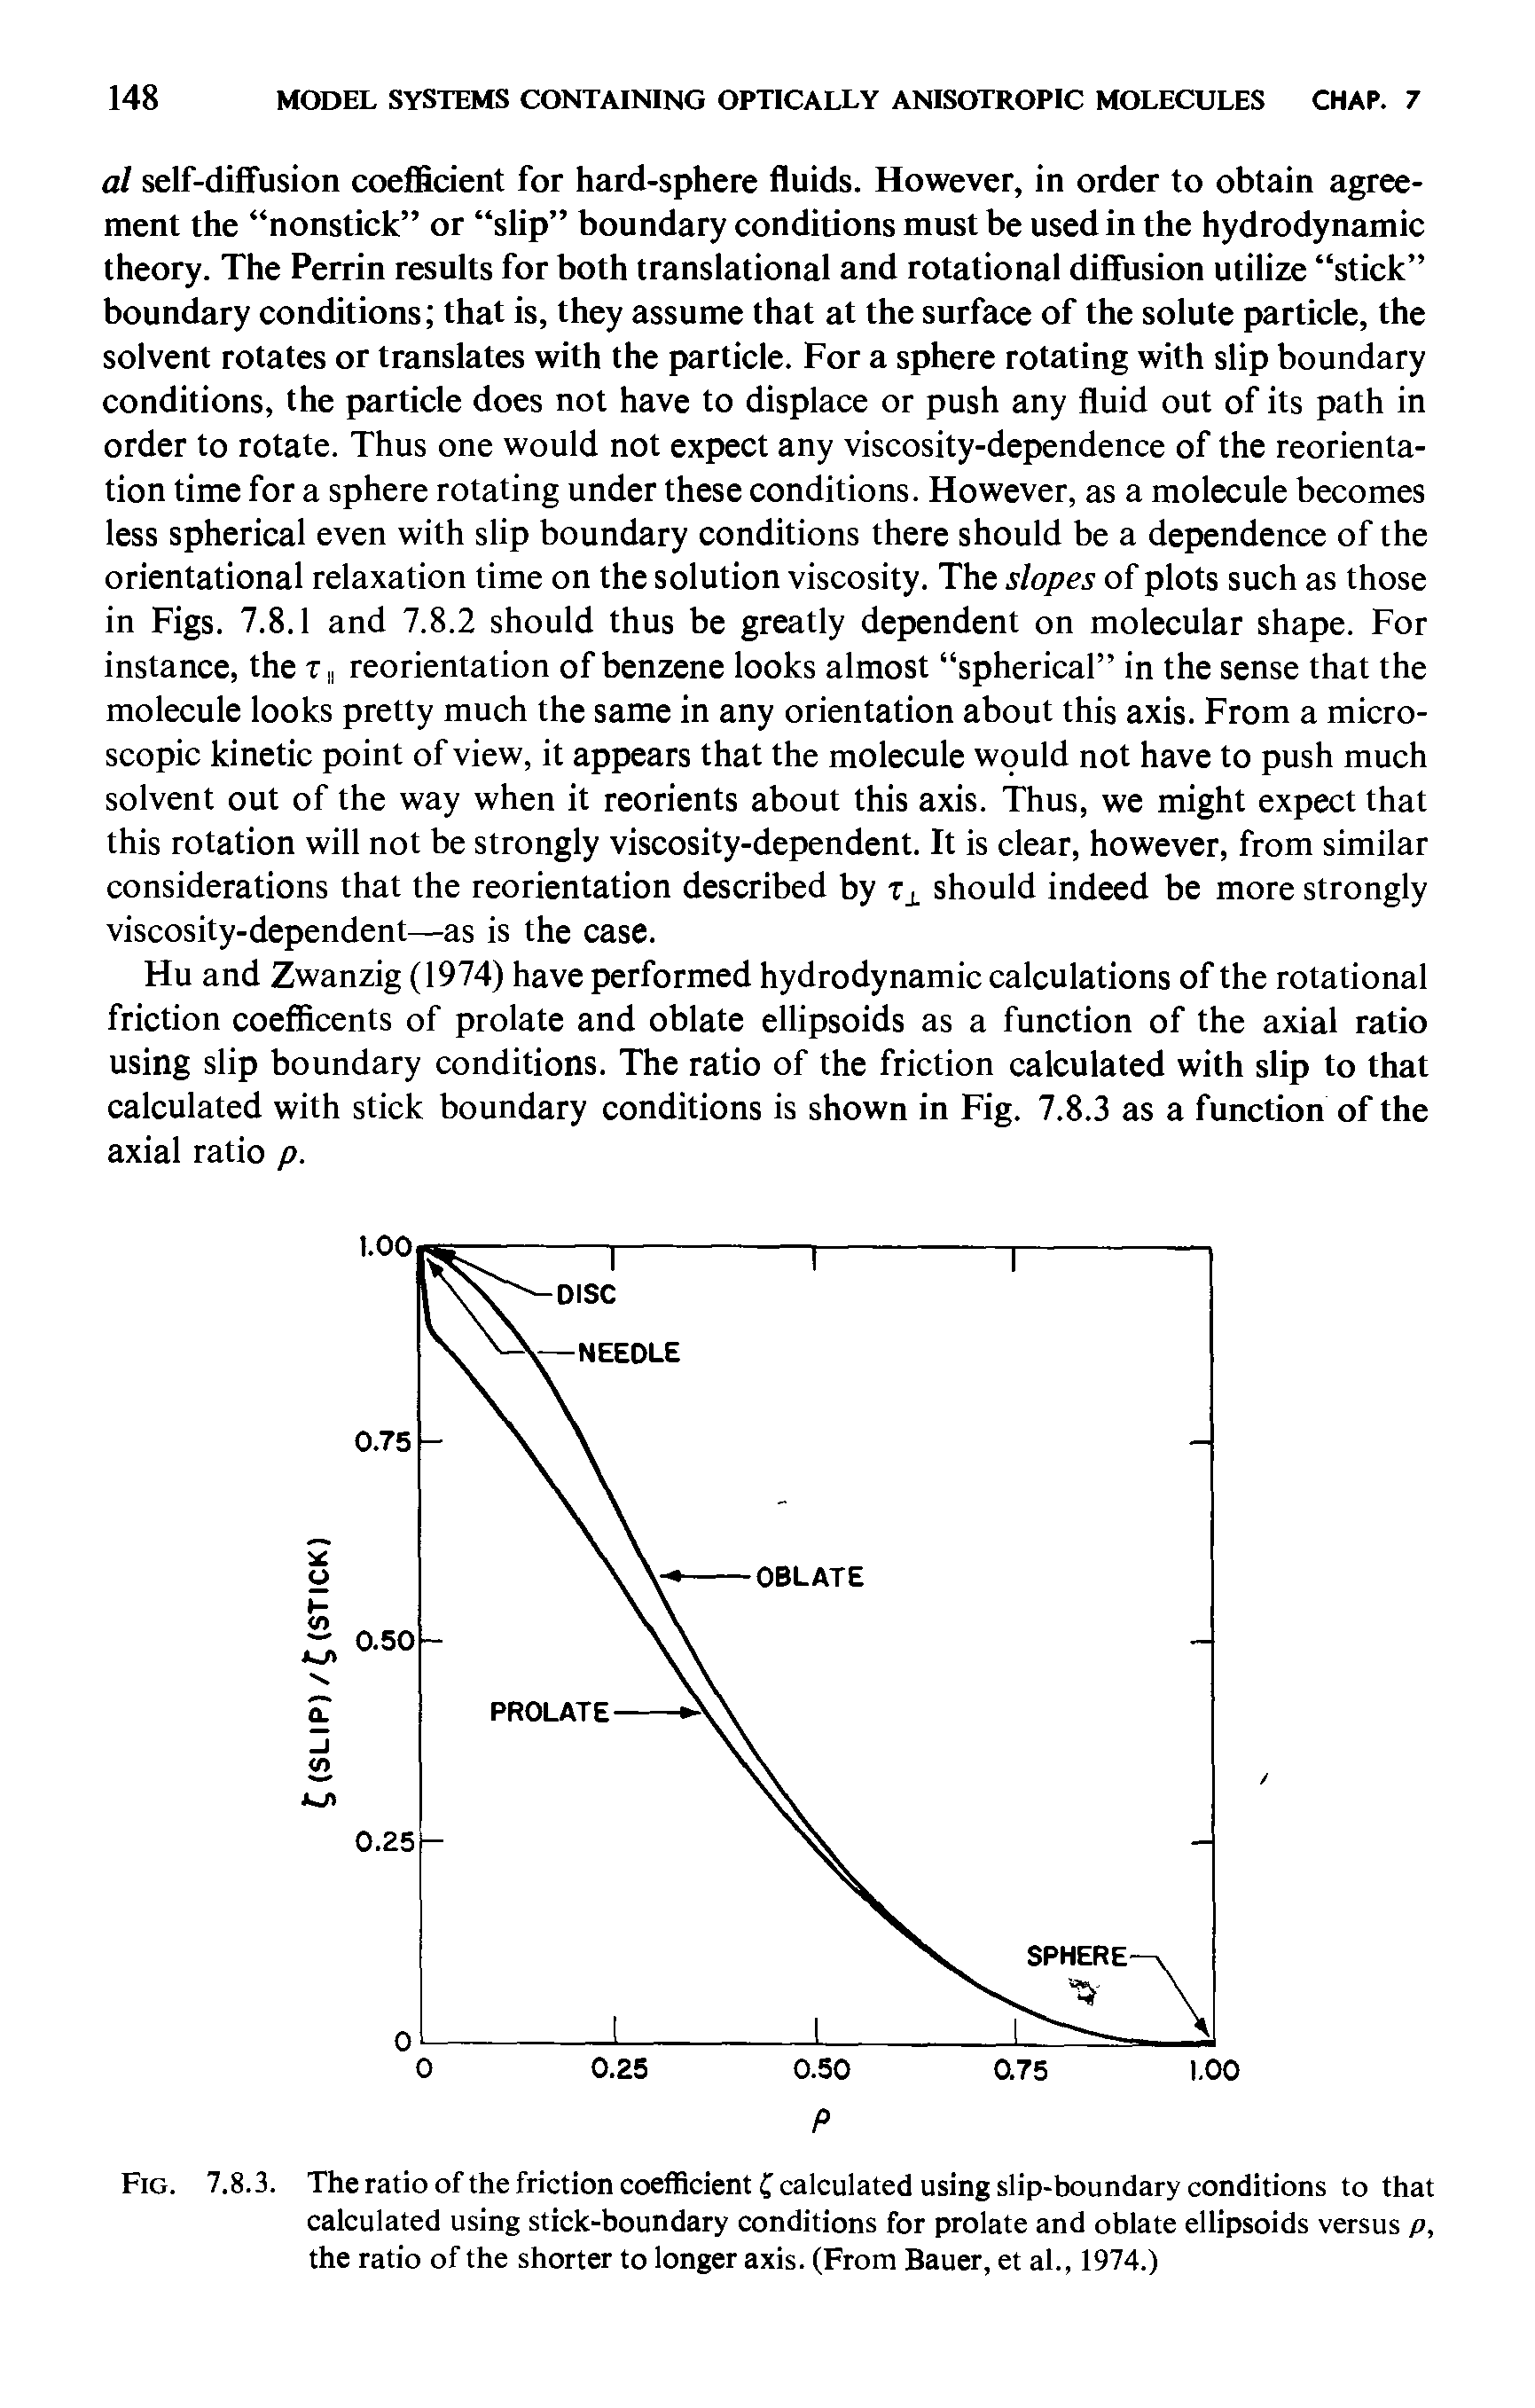 Fig. 7.8.3. The ratio of the friction coefficient calculated using slip-boundary conditions to that calculated using stick-boundary conditions for prolate and oblate ellipsoids versus p, the ratio of the shorter to longer axis. (From Bauer, et al., 1974.)...